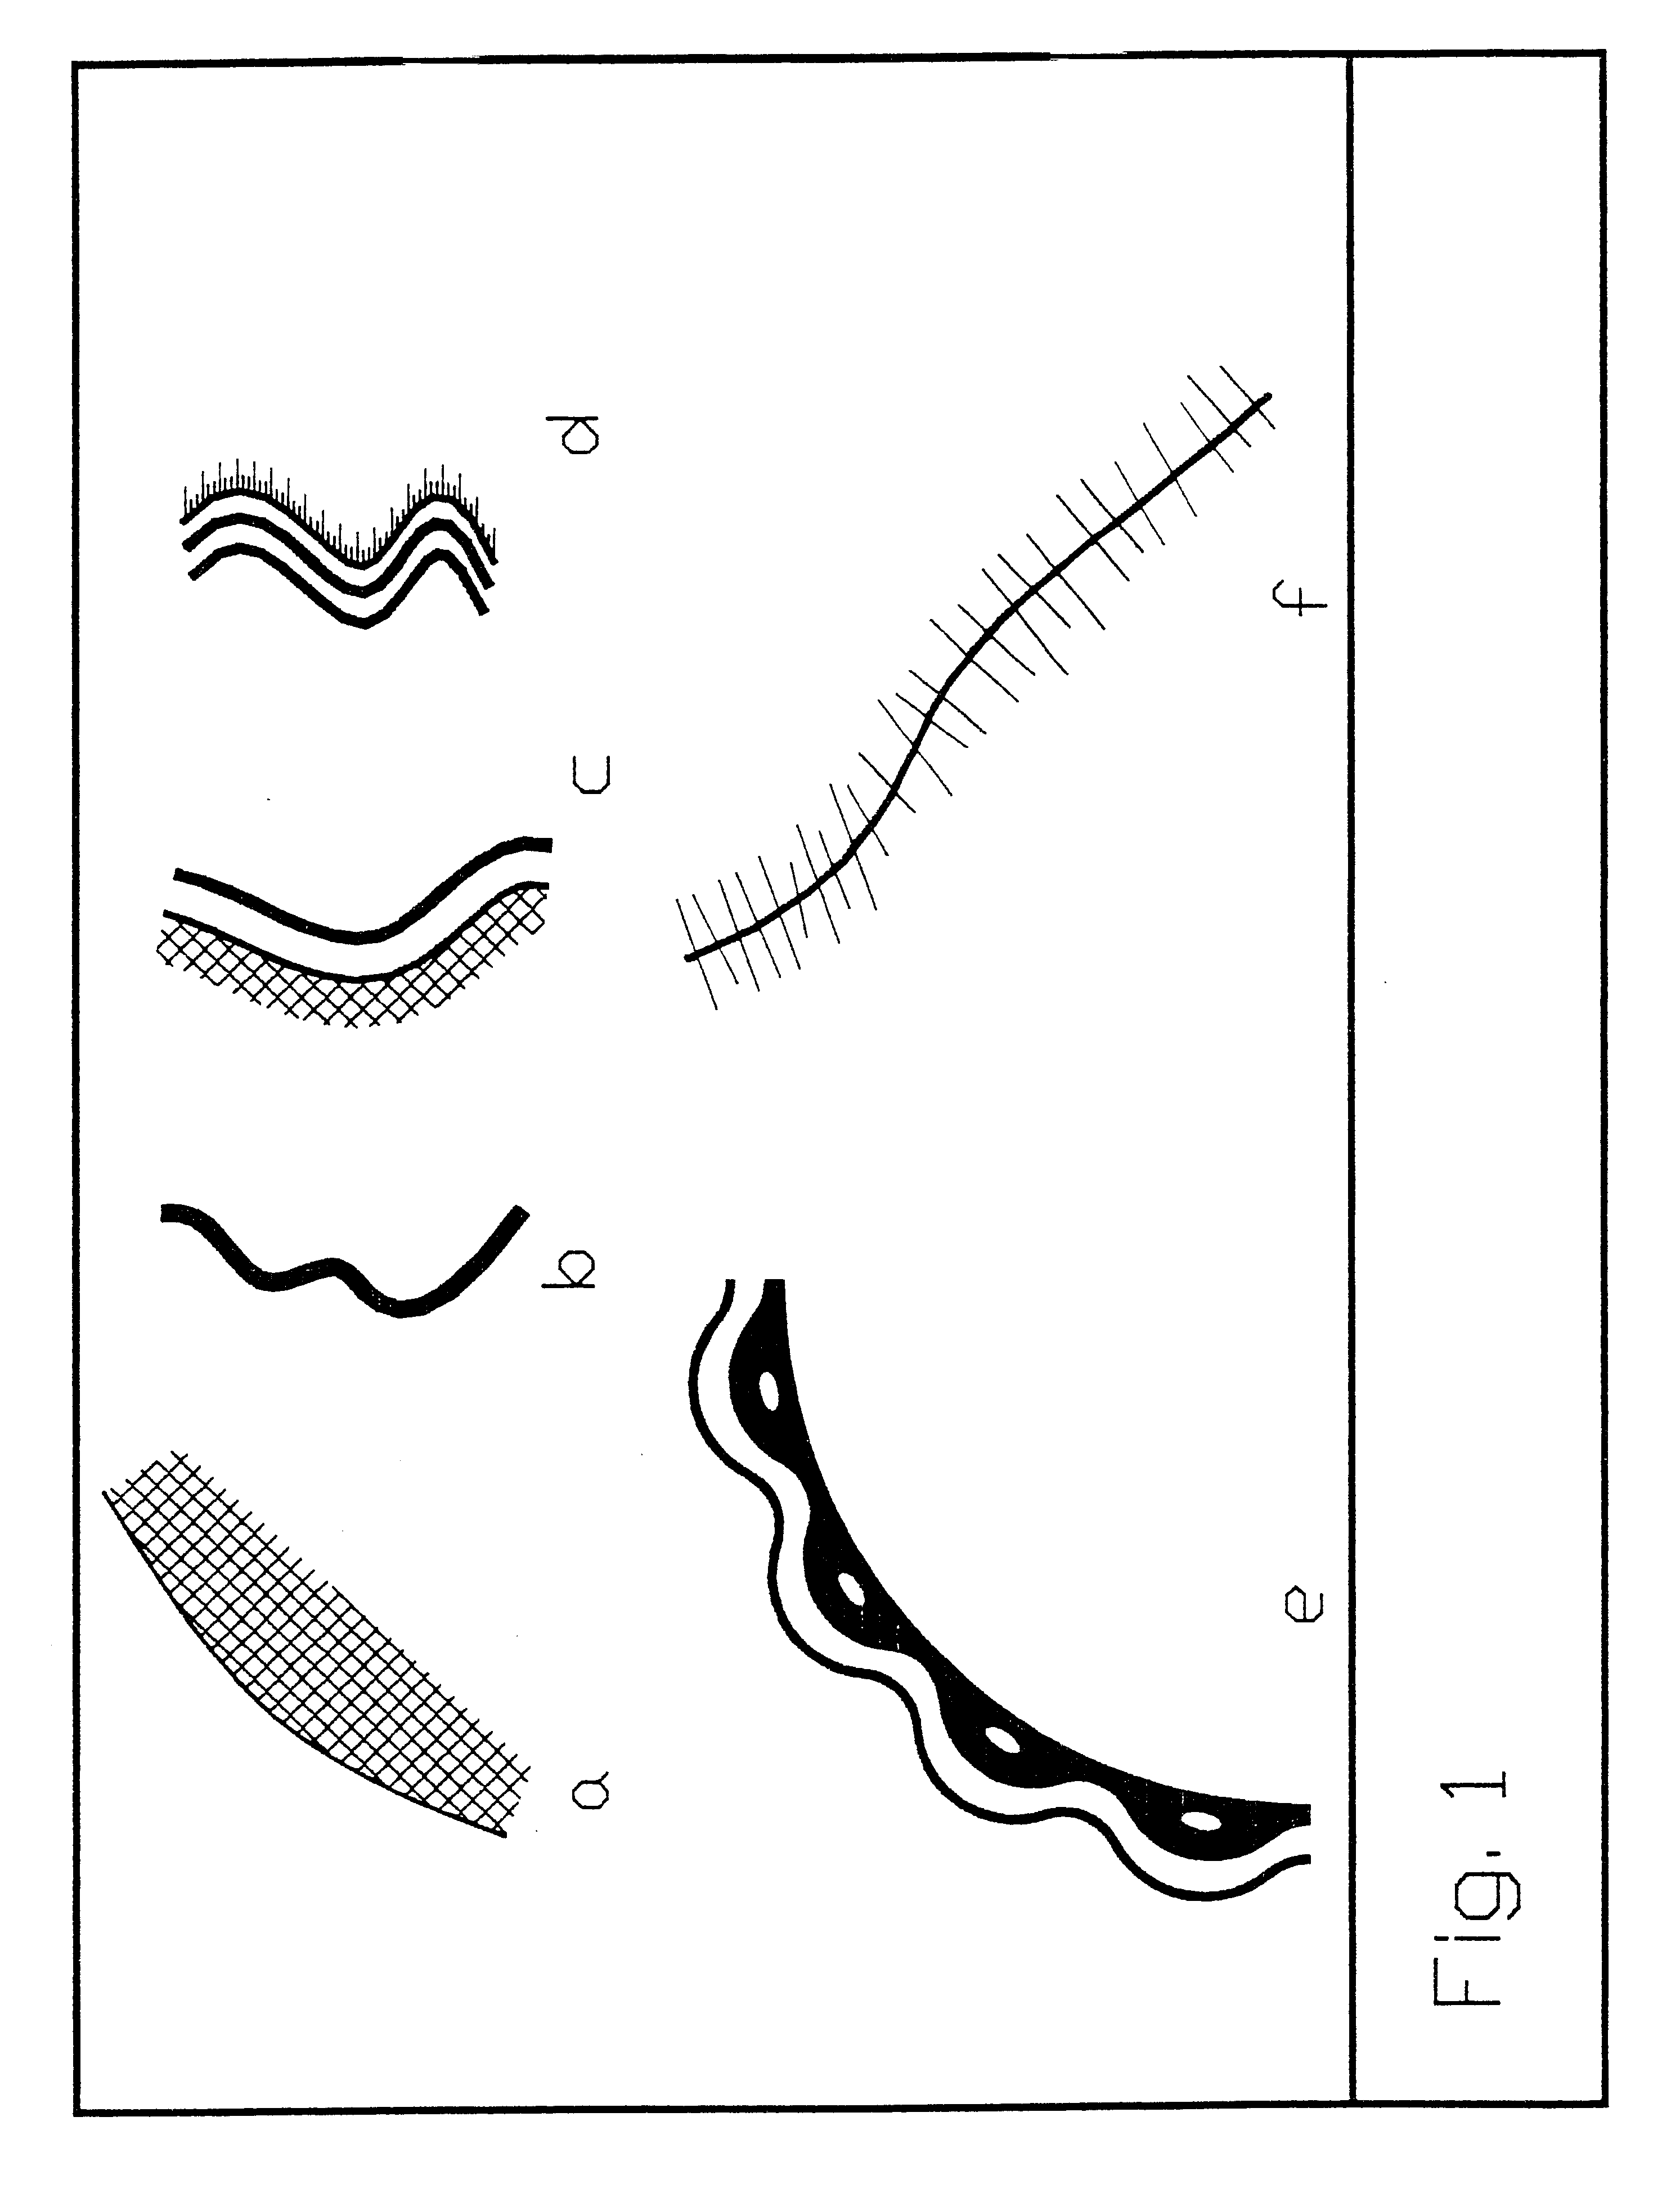 Method and apparatus for image analysis and processing by identification of characteristic lines and corresponding parameters